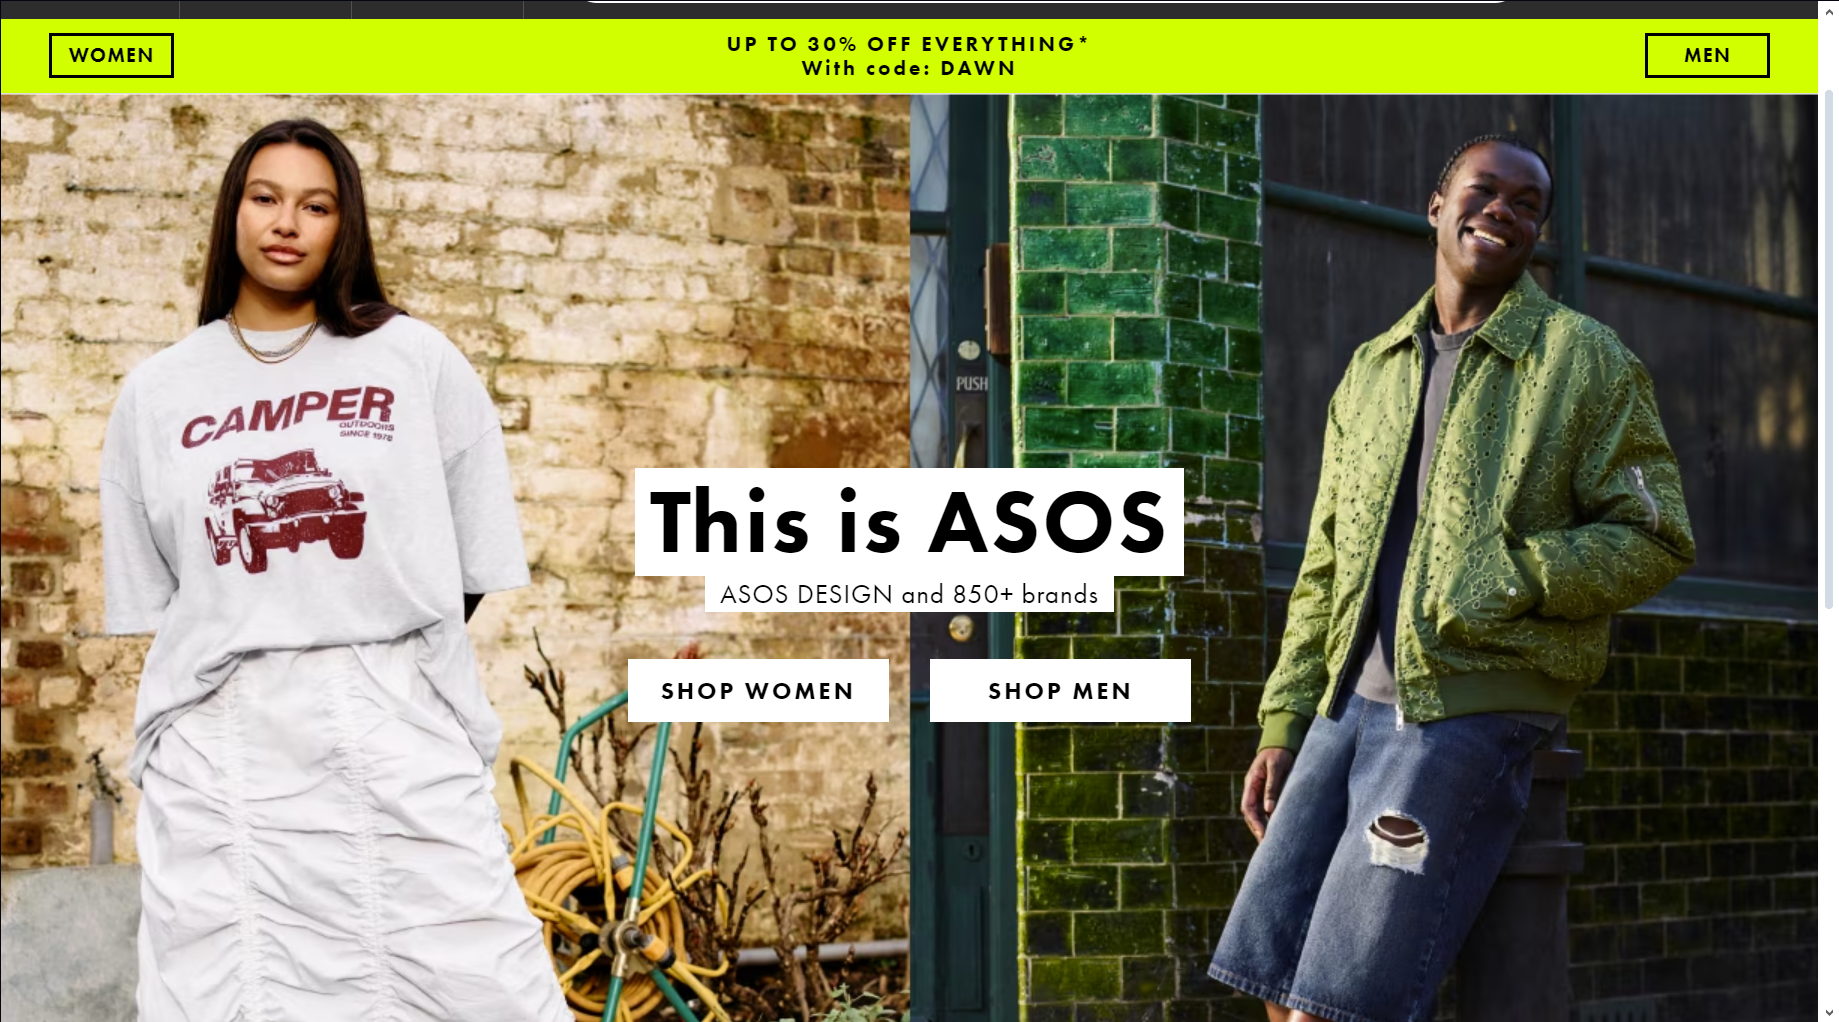 Visit ASOS for Awesome Valentine’s Day Deals